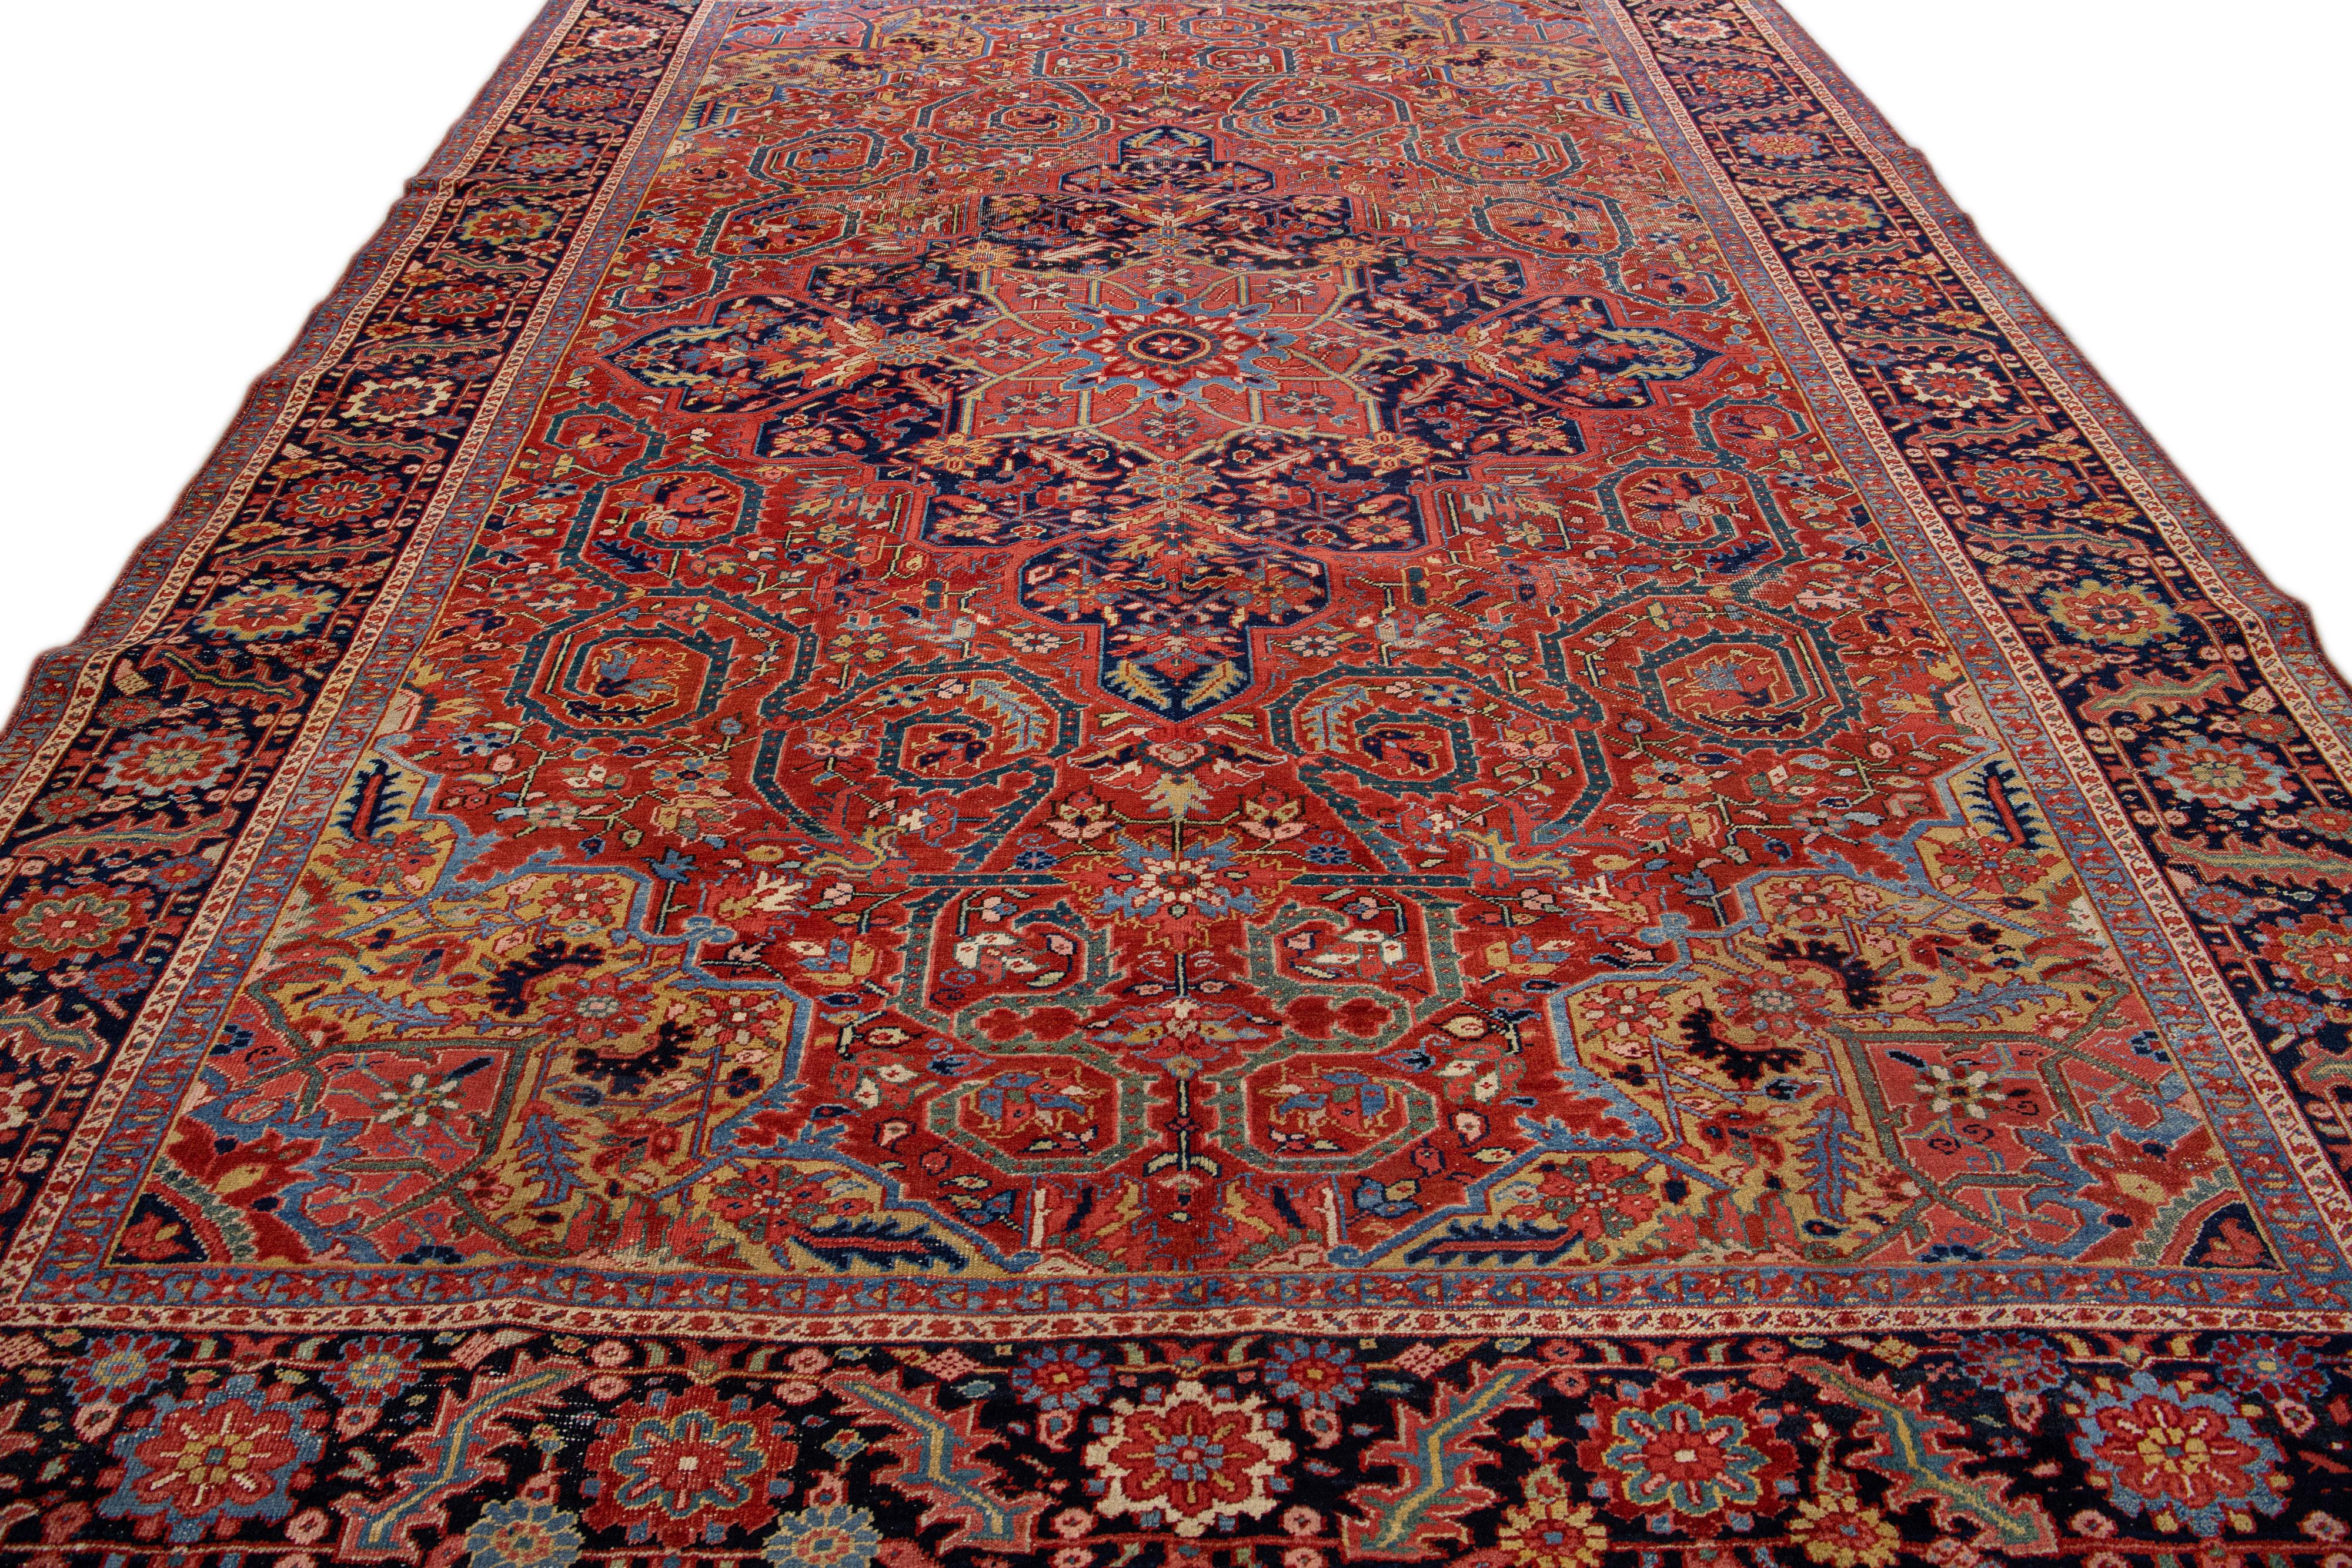 Beautiful antique Heriz hand-knotted wool rug with a red color field. This Persian rug has a navy-blue designed frame and multicolor accents in a gorgeous medallion floral design.

This rug measures: 9'9